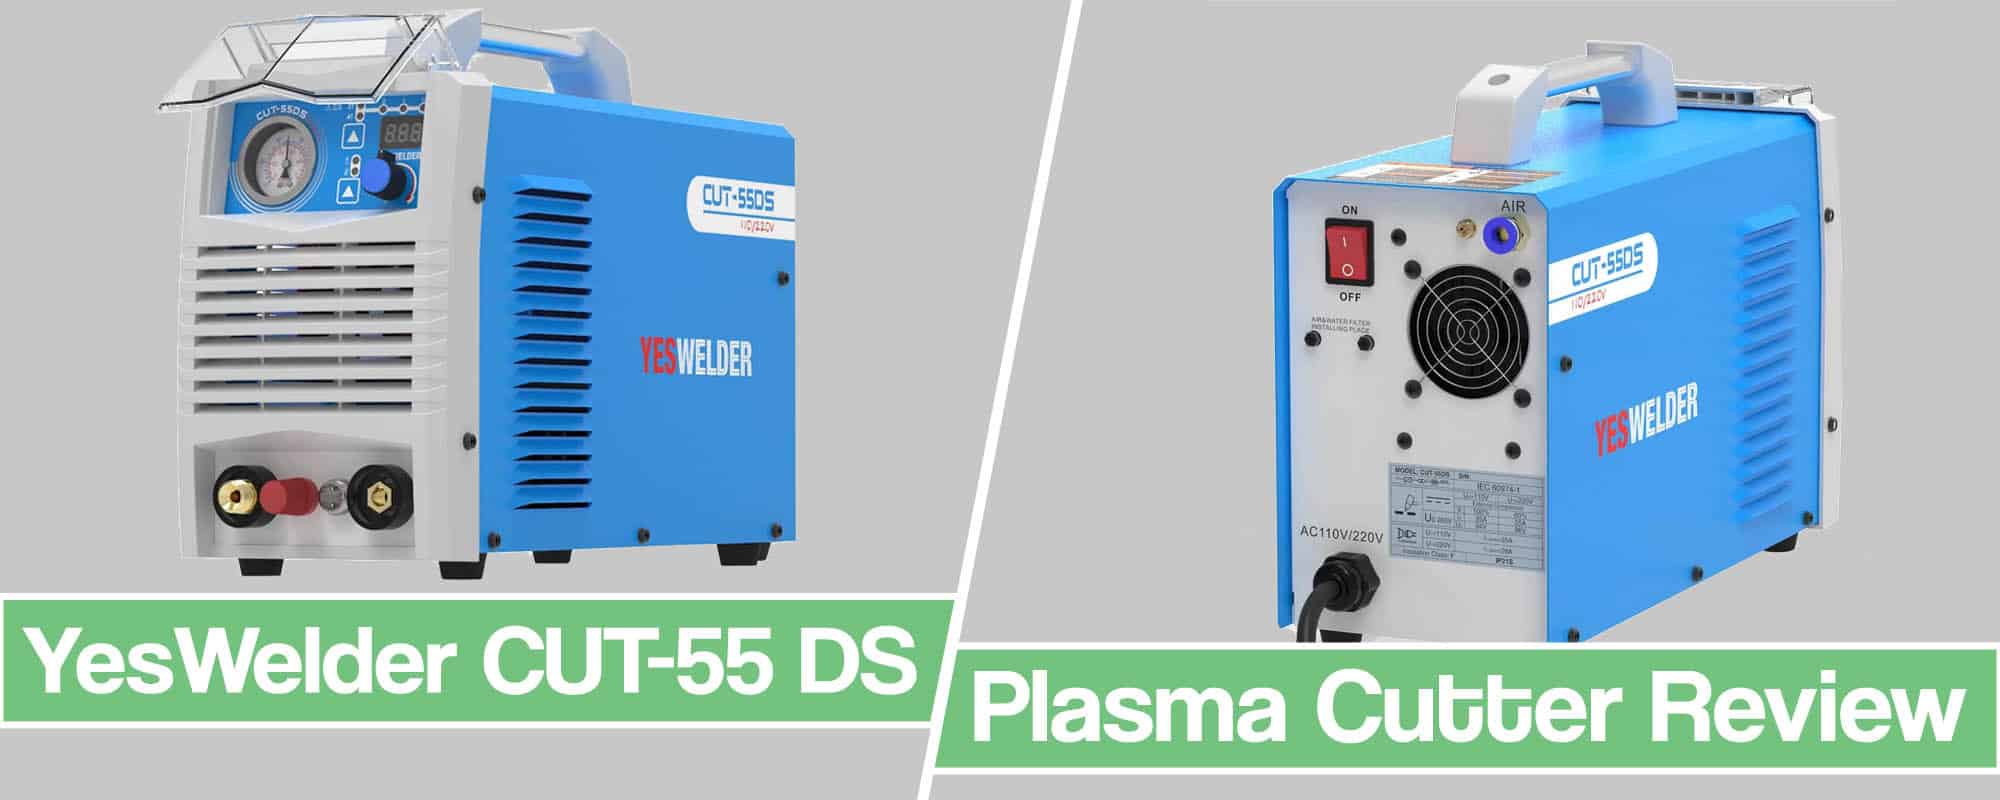 YesWelder CUT-55 DS Review – The Power, Cutting and Pros/Cons of This Plasma Cutter